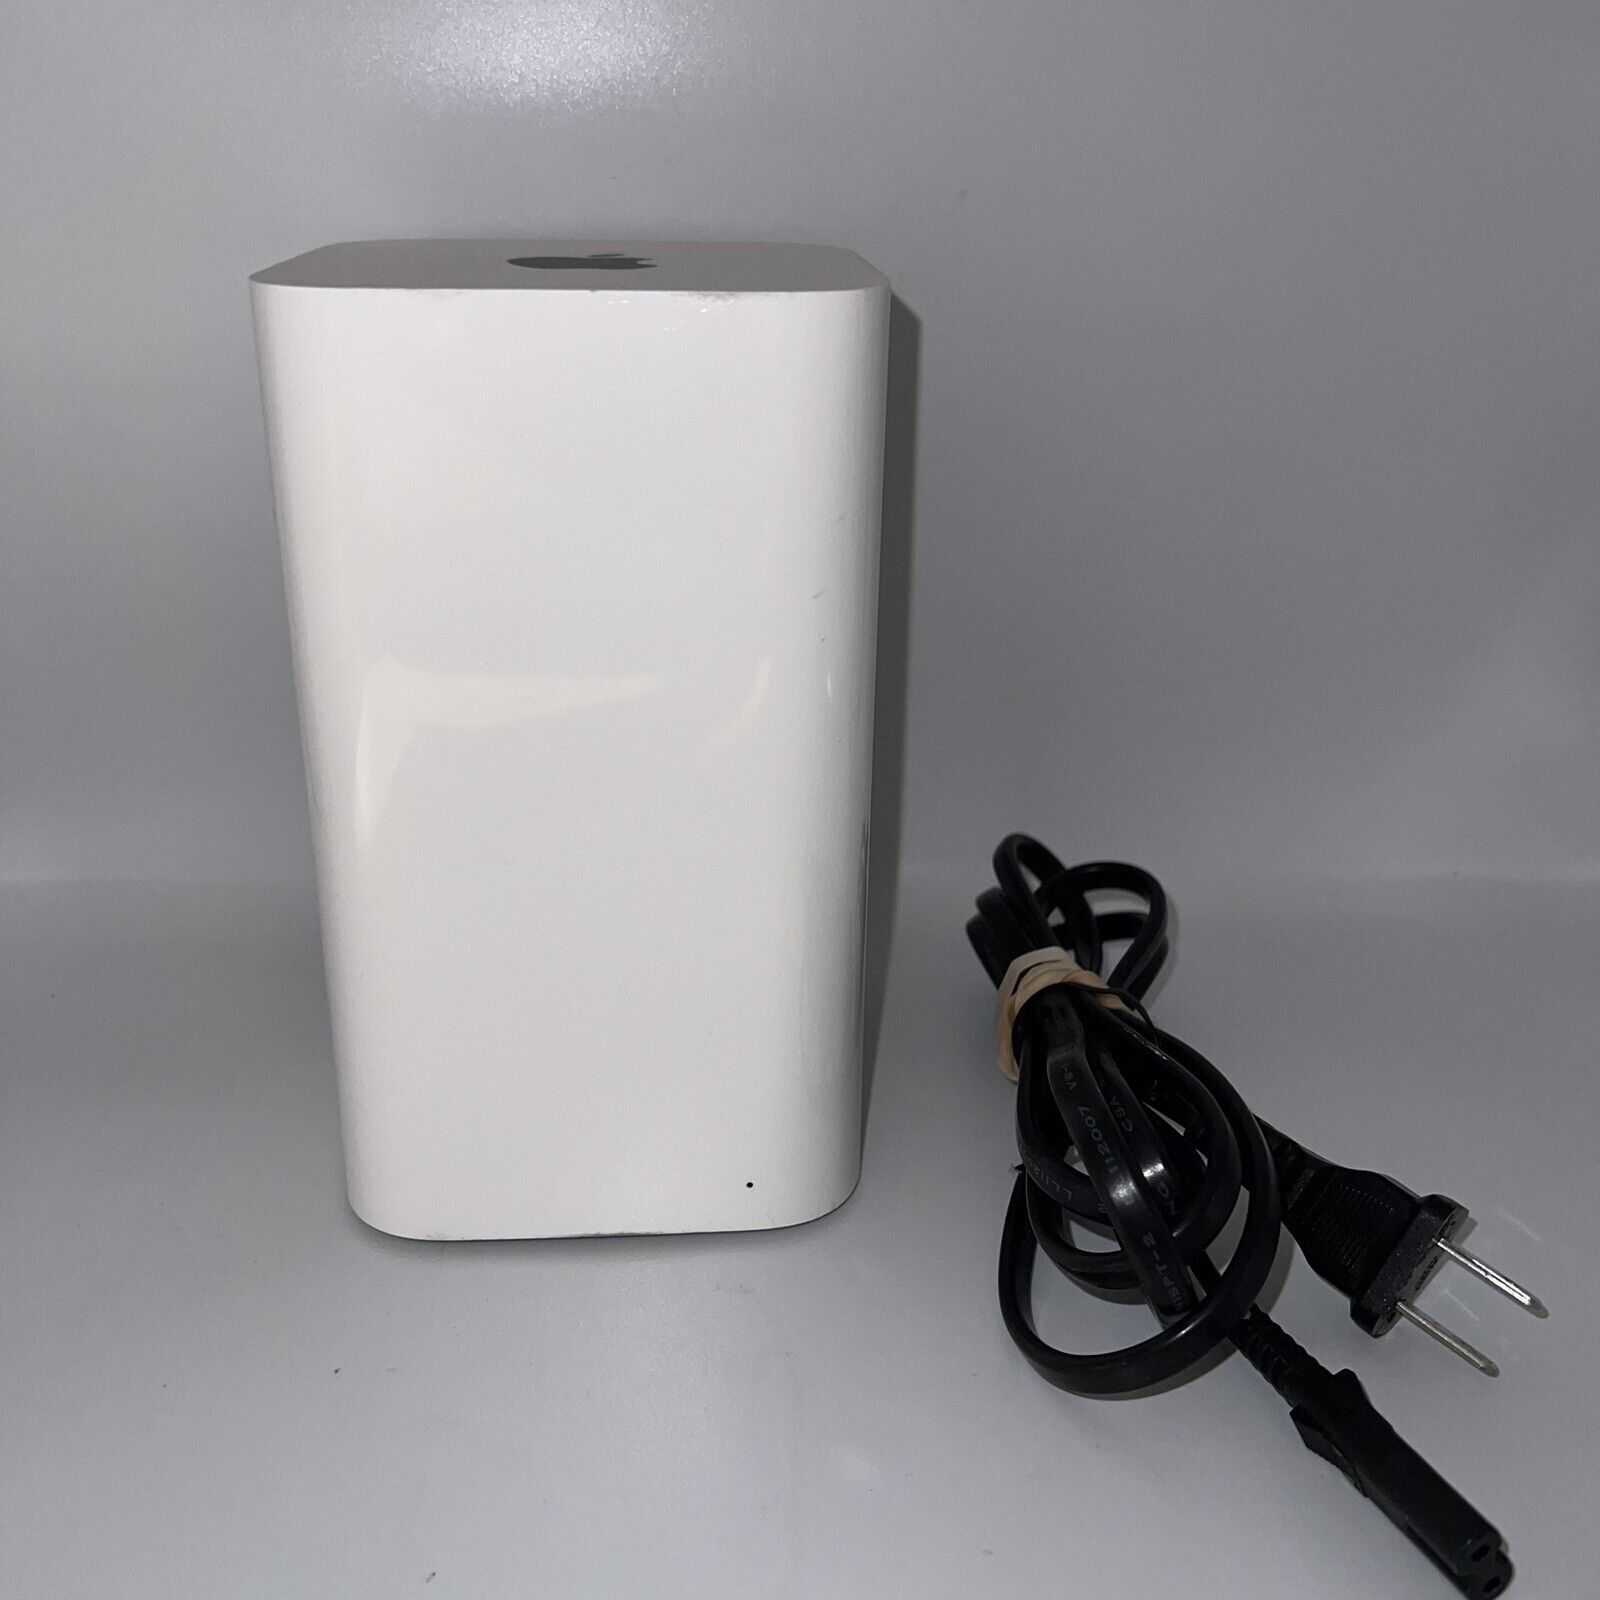 Apple AirPort A1521 Extreme Base Station 6th Gen Dual Band 802.11ac Wifi Router